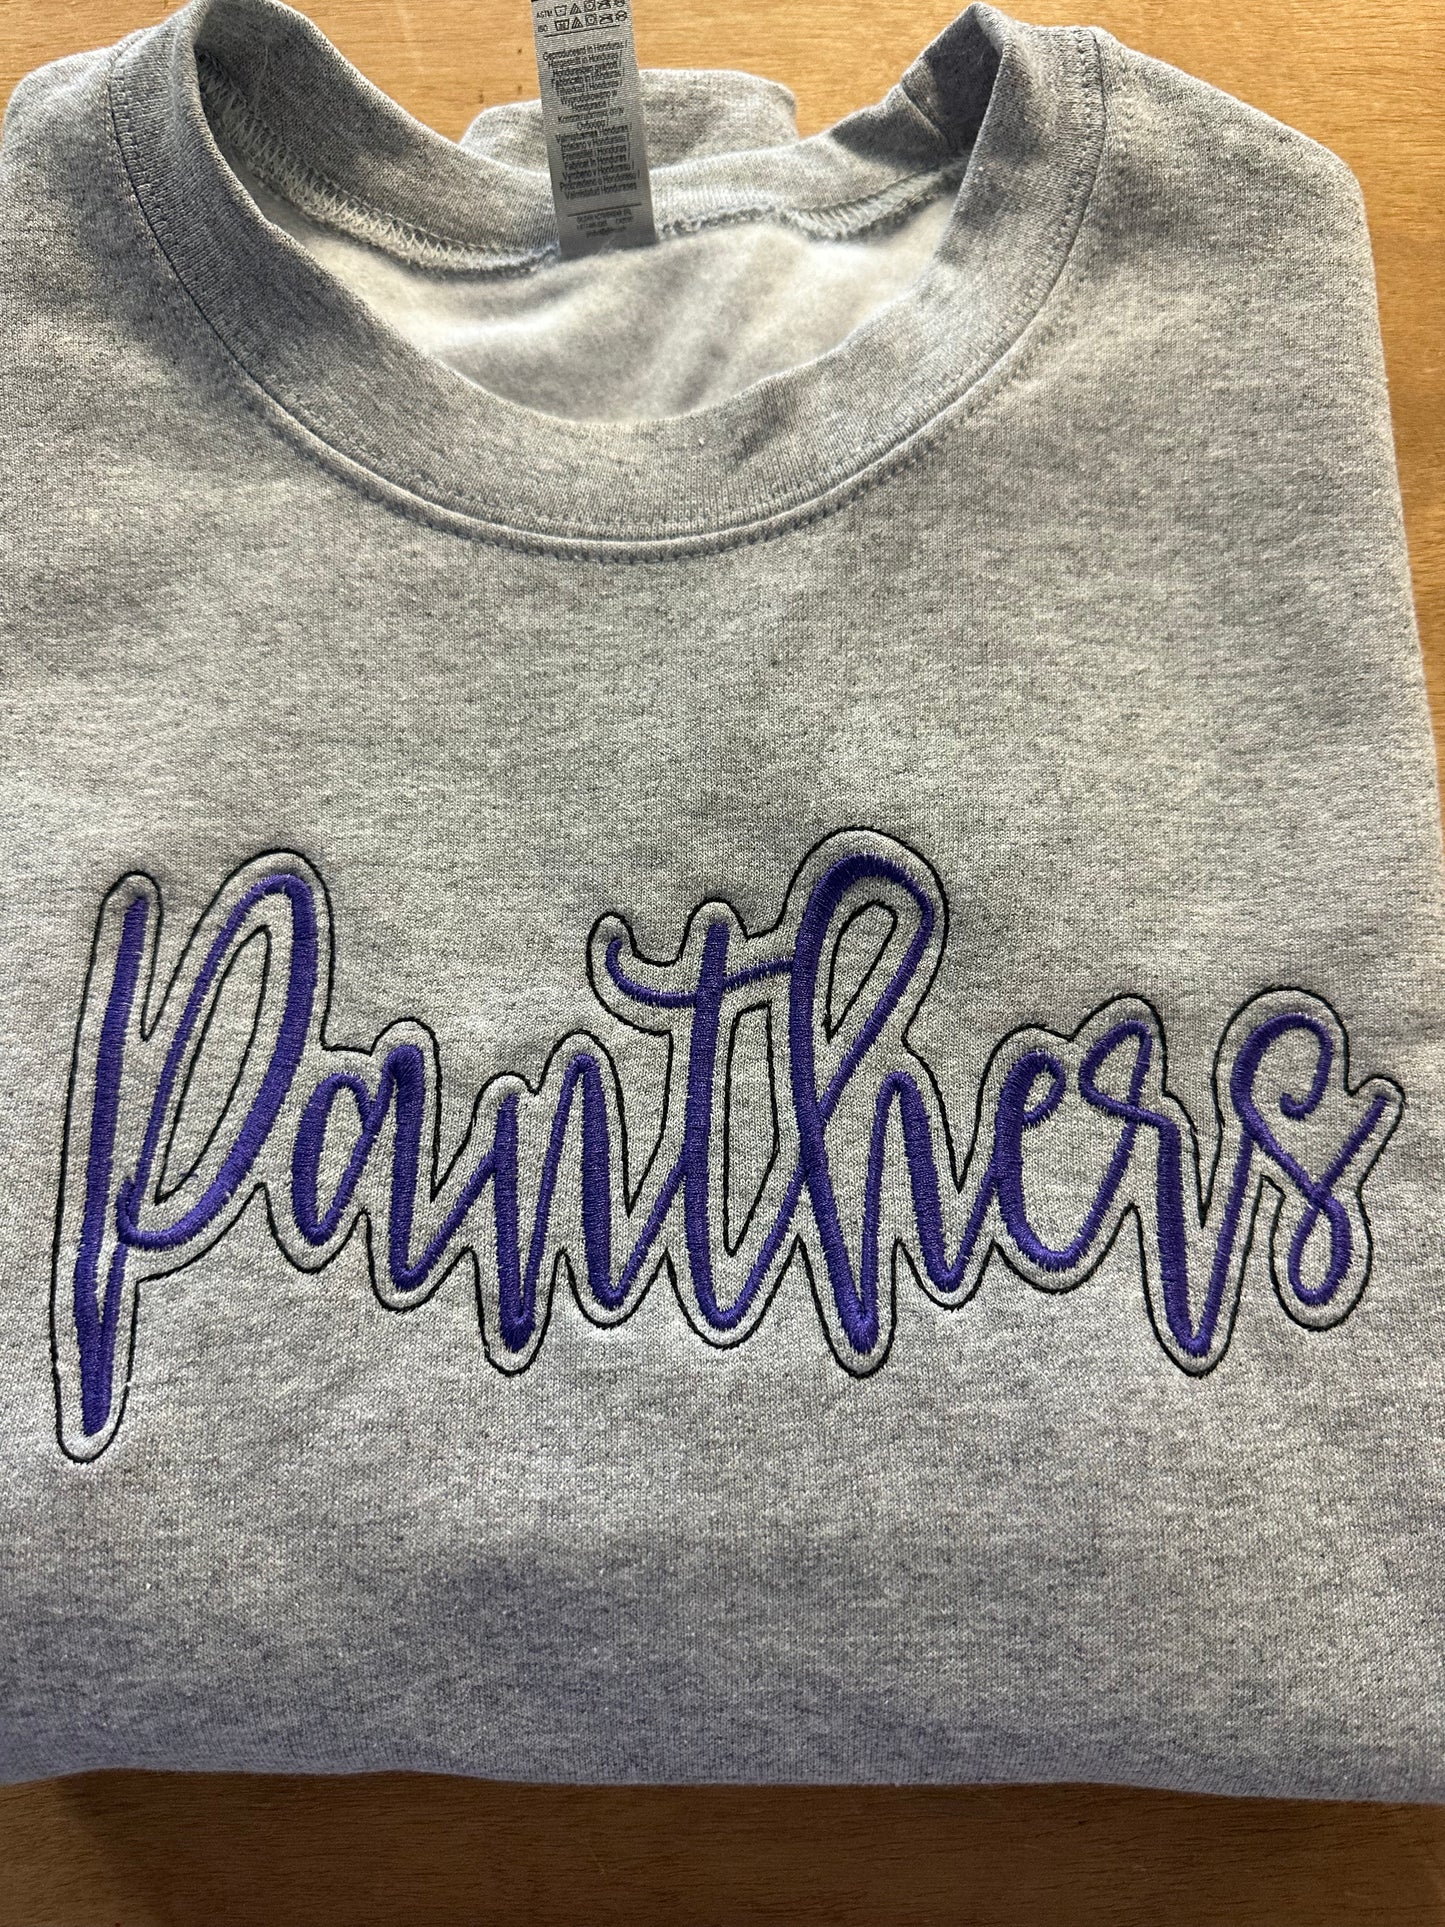 Panthers Embroidered Sweatshirt